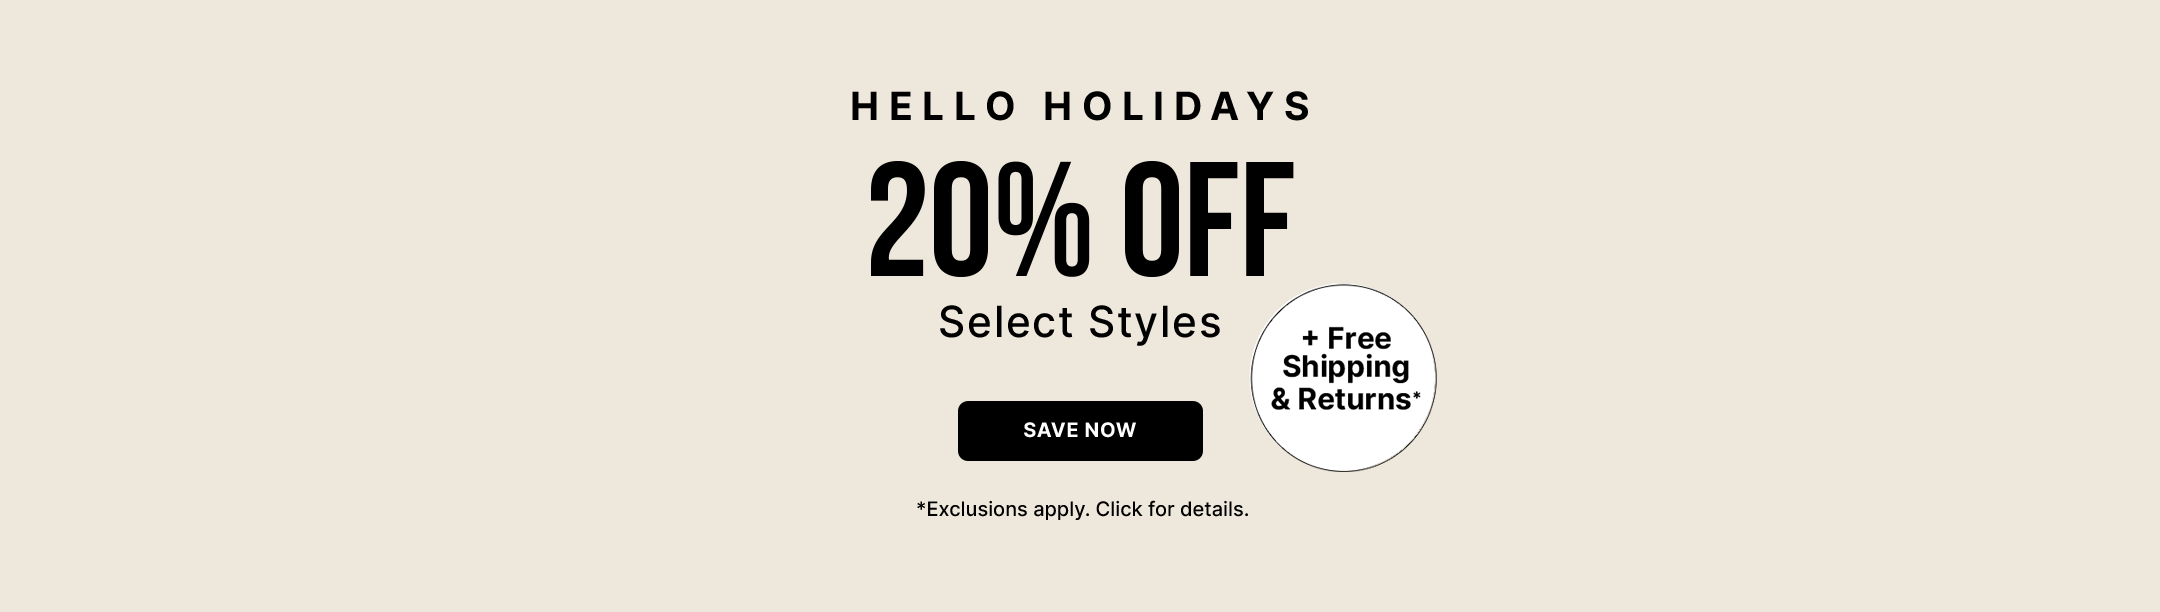 HELLO HOLIDAYS
20% off 
Select Styles. + Free Shipping & Returns*
*Exclusions apply. Click For Details. 